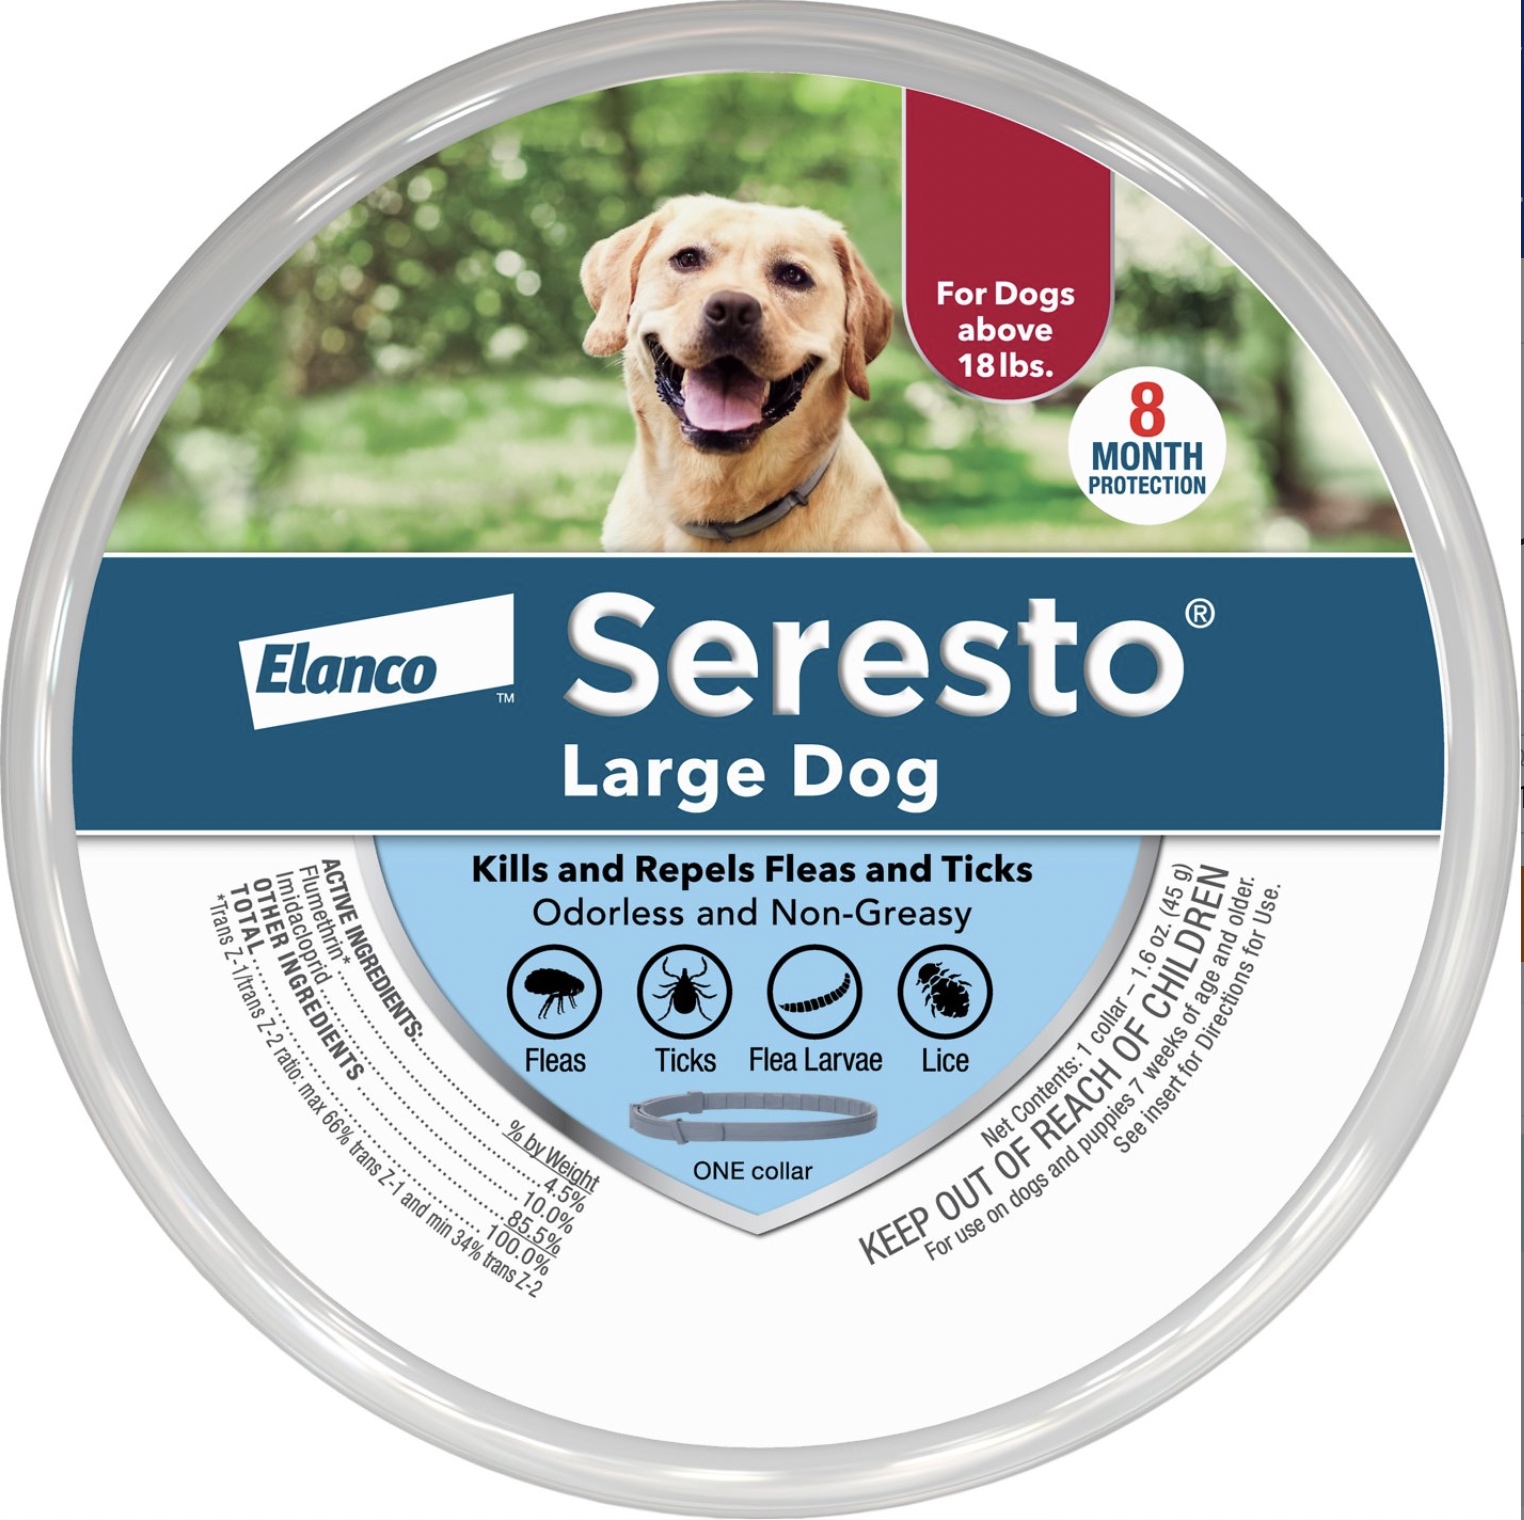 Chewy: Buy One Seresto Flea & Tick Collar And Get One 25% Off + Free Shipping Over $49